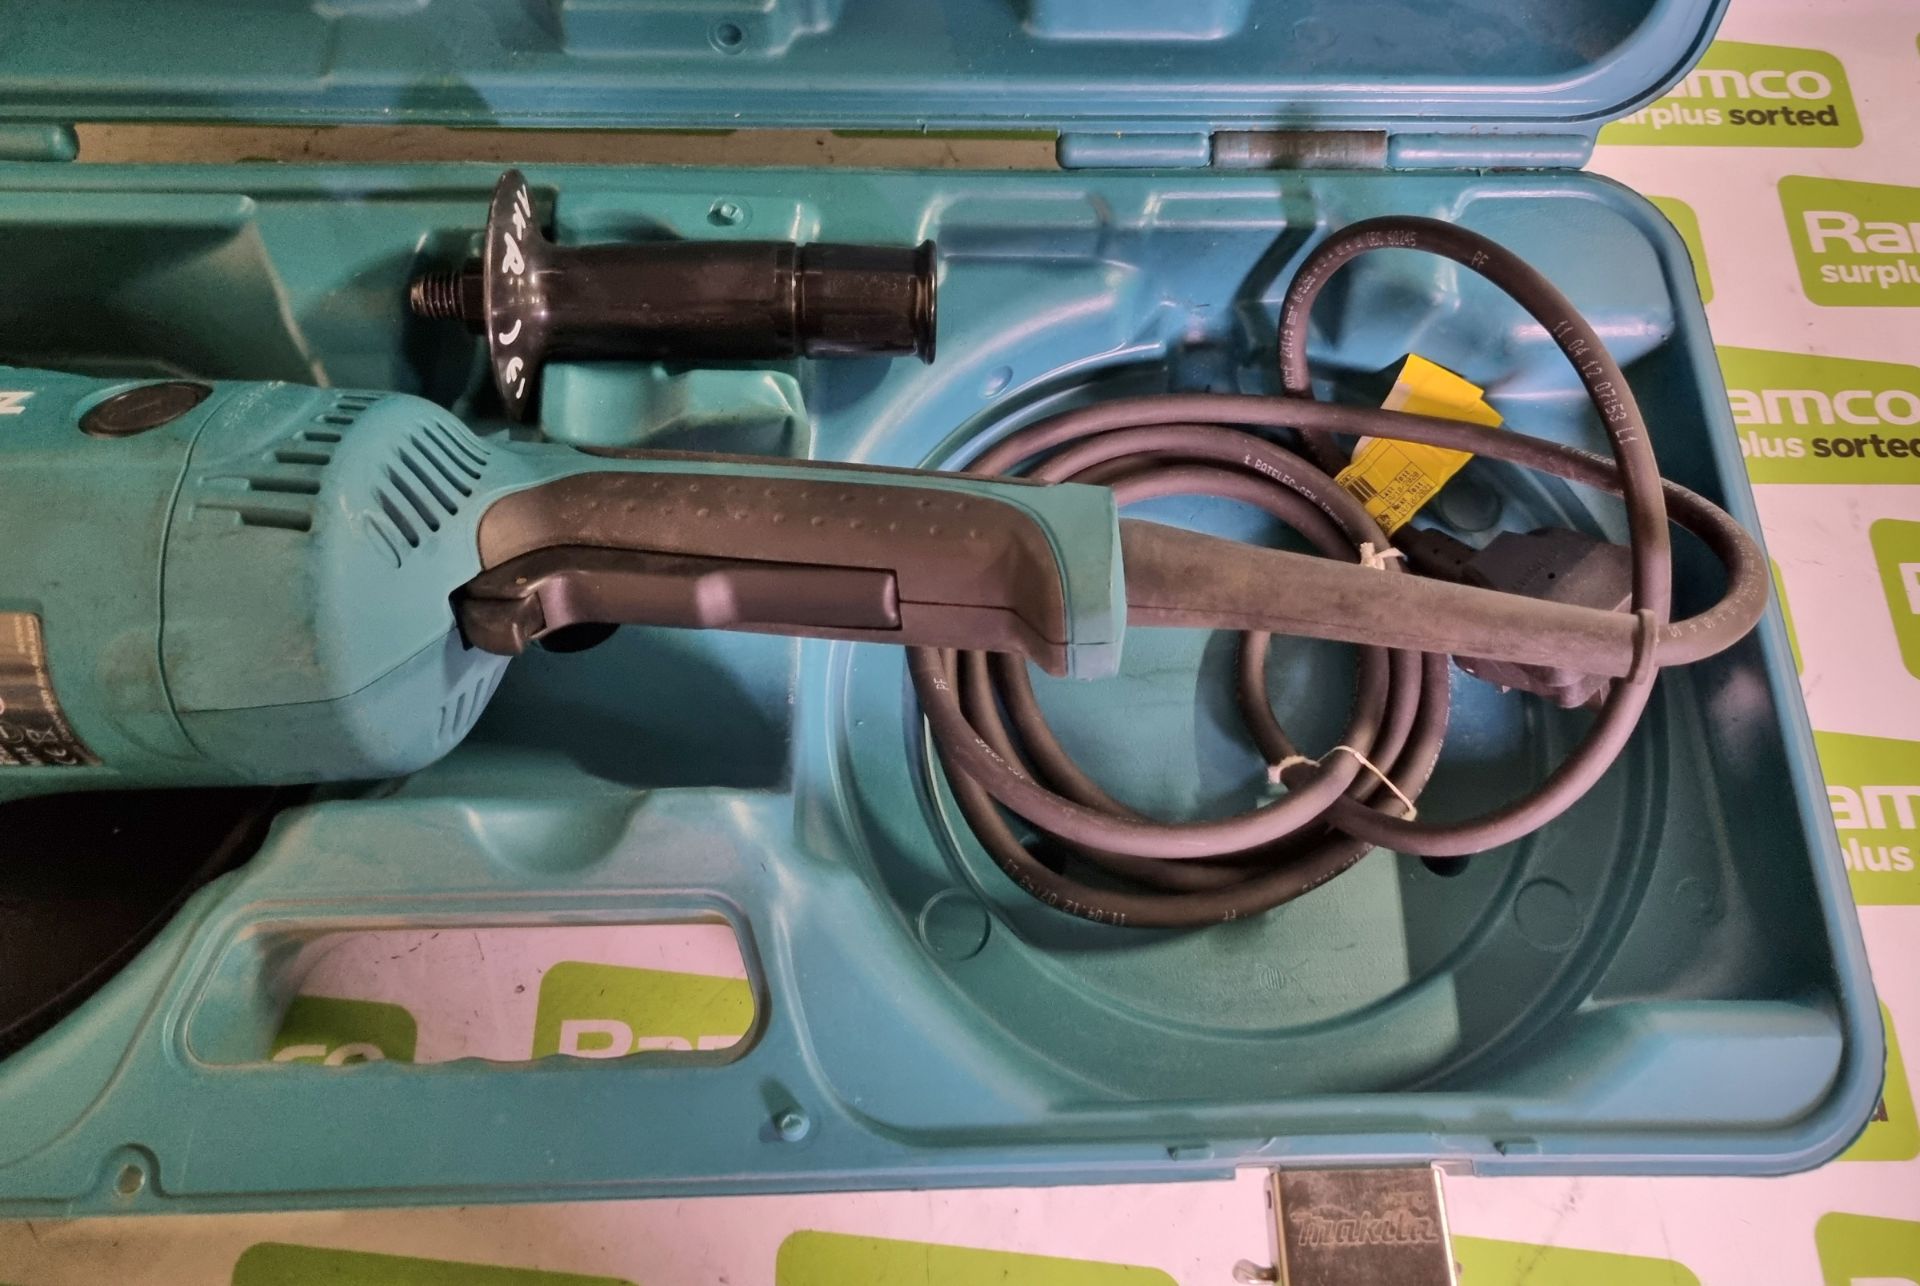 Makita GA9020S 9 inch electric angle grinder with case - 2000W - no discs - missing key - Image 3 of 7